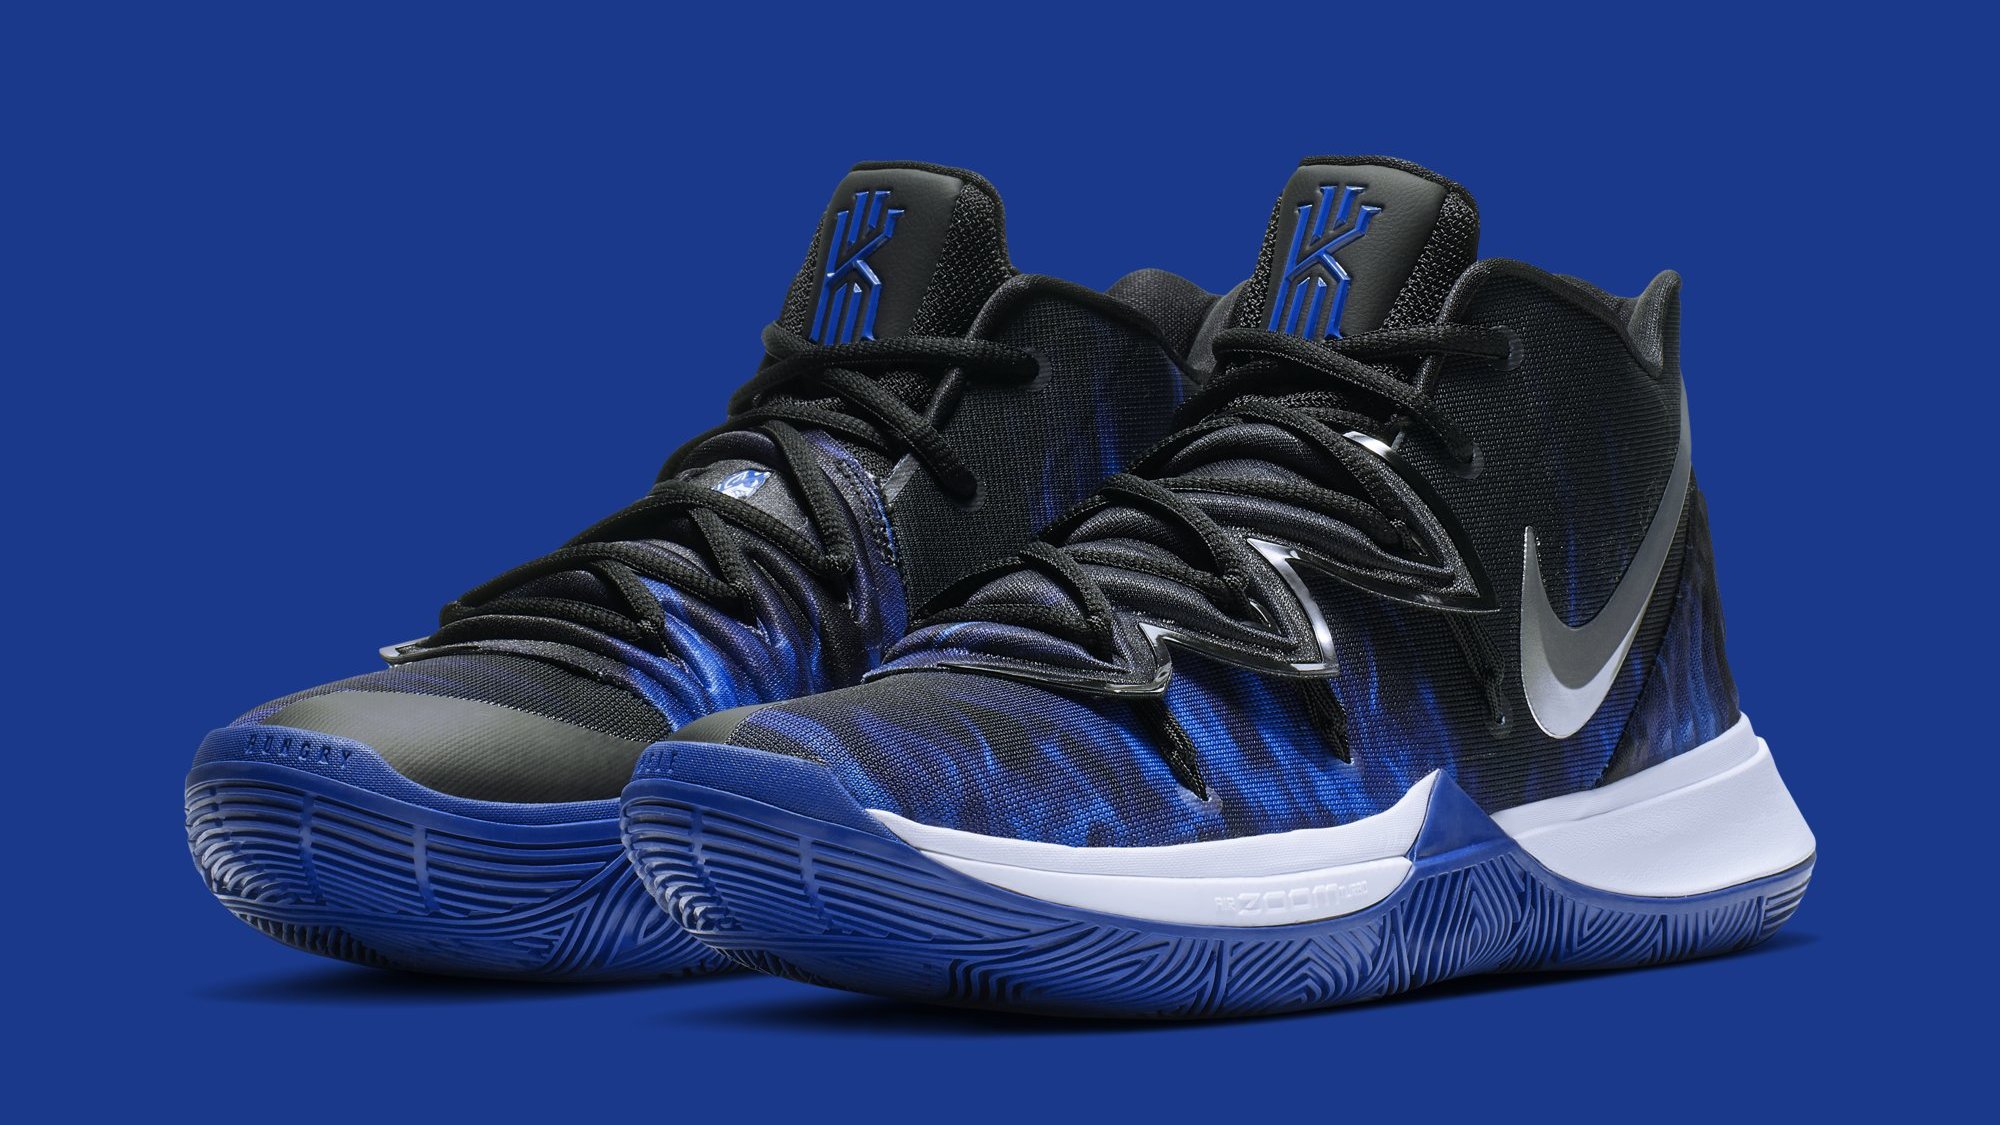 is the kyrie 2 duke dropping in the nike store